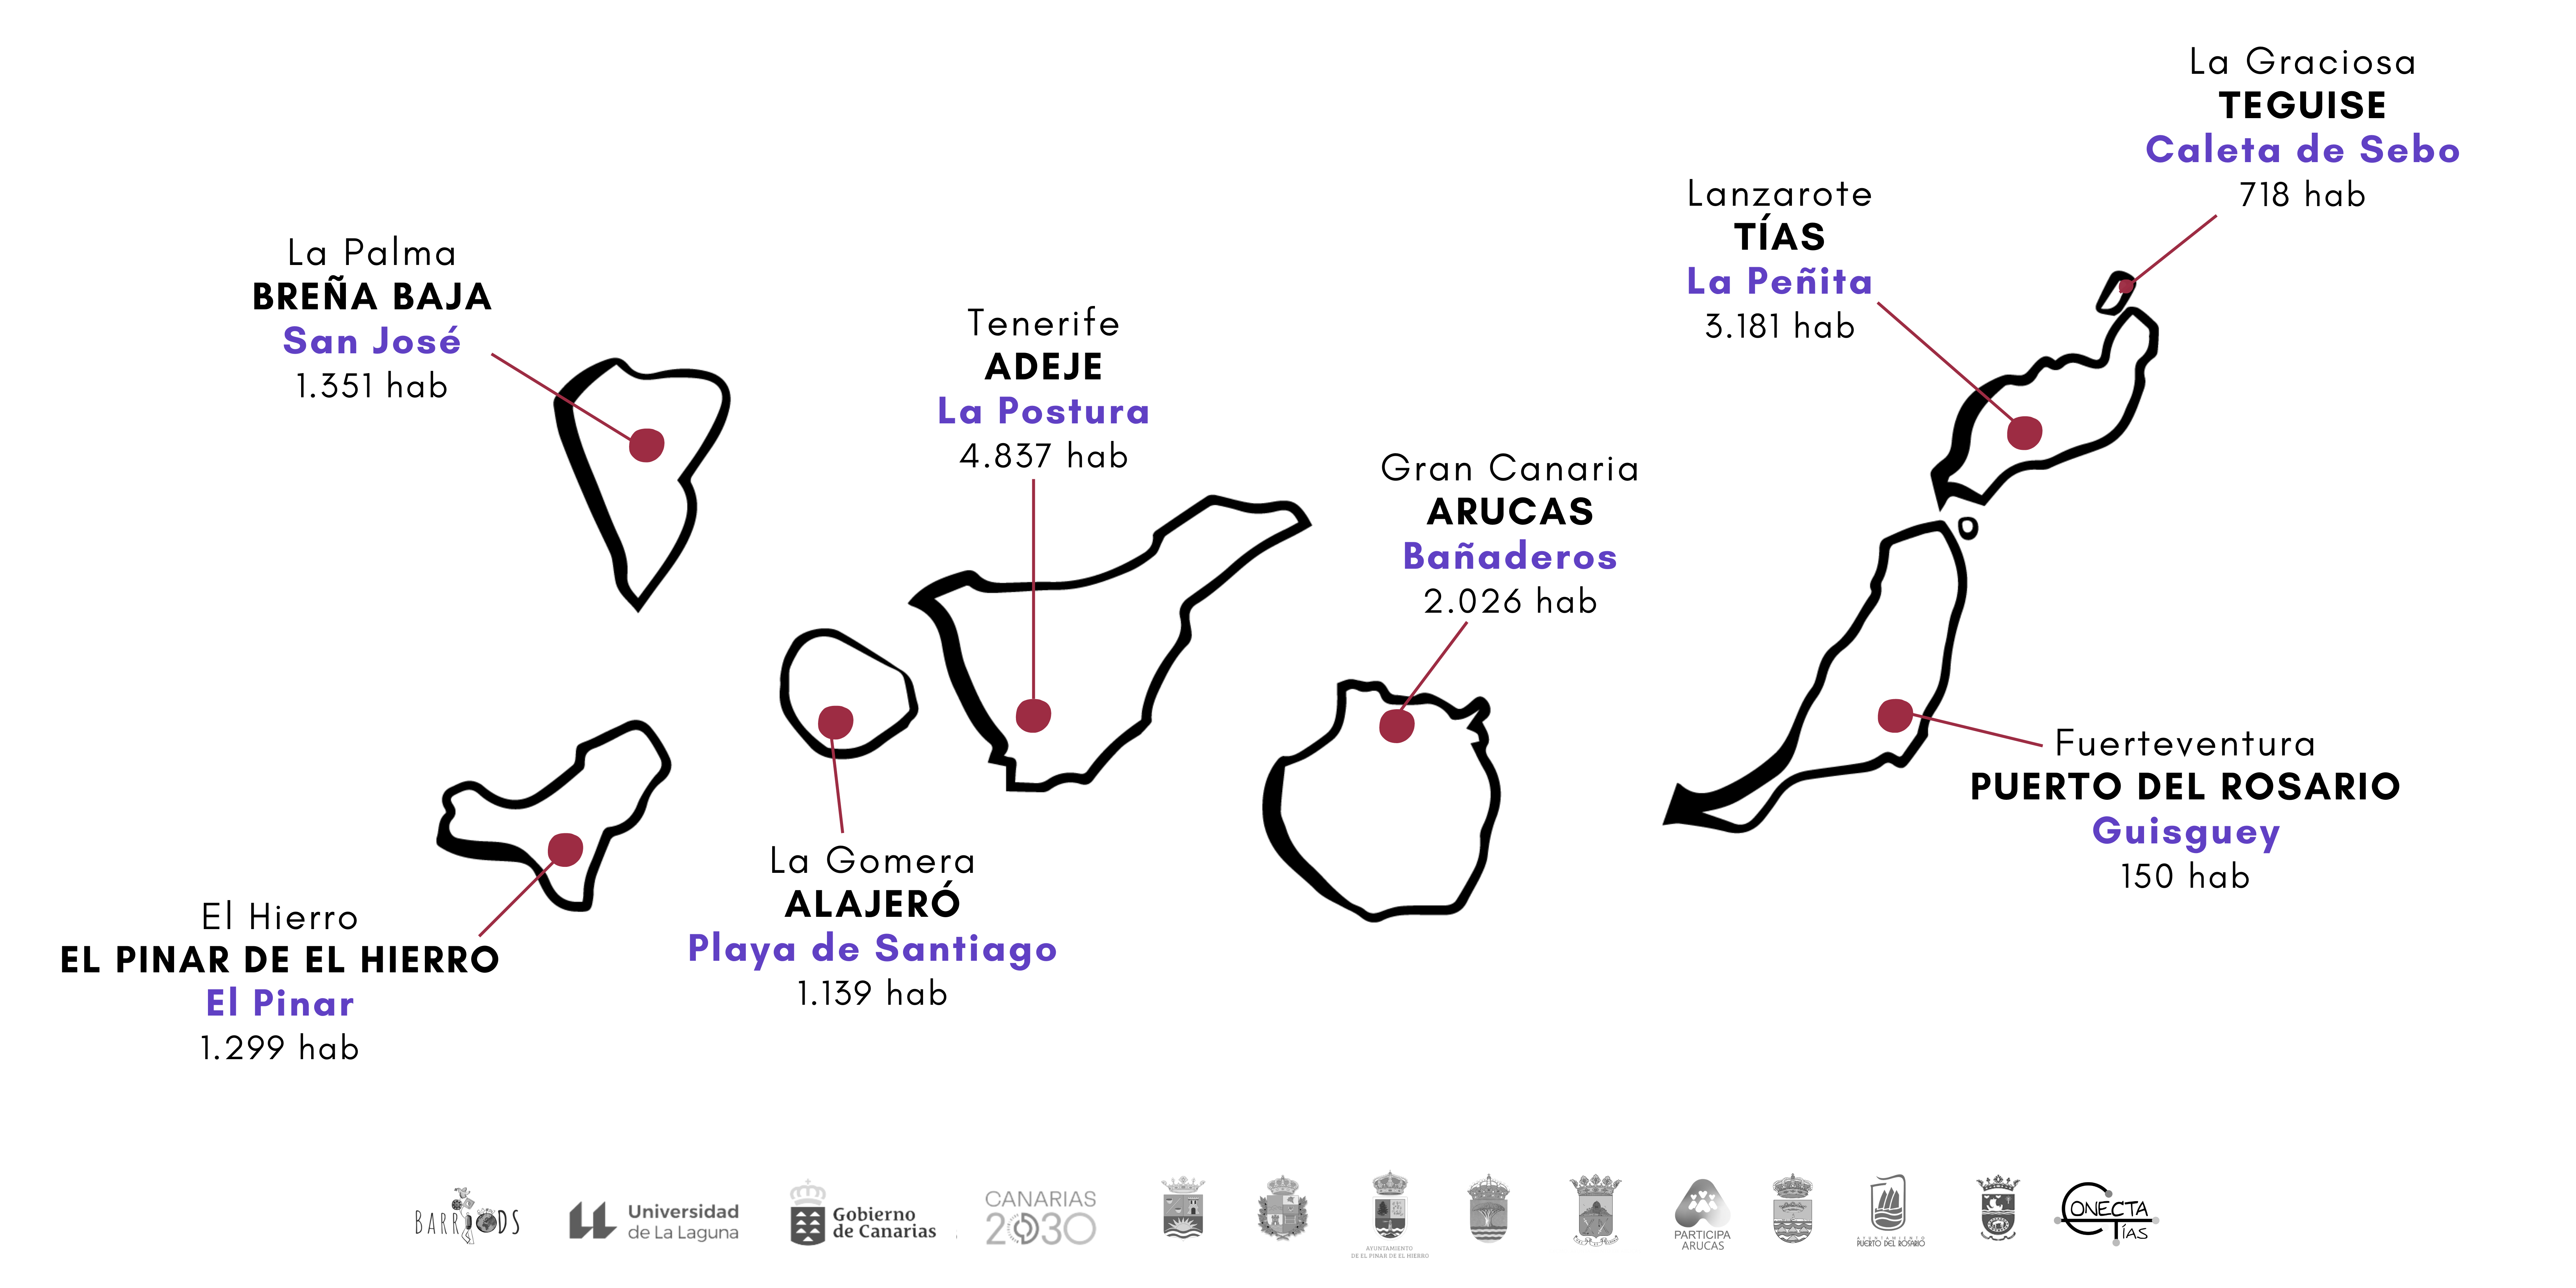 Map of the Canary Islands showing the eight populated islands and the eight neighborhoods or villages, one for each of the islands, selected as part of the 'BarriODS' Project. Photo from BarriODS Team.